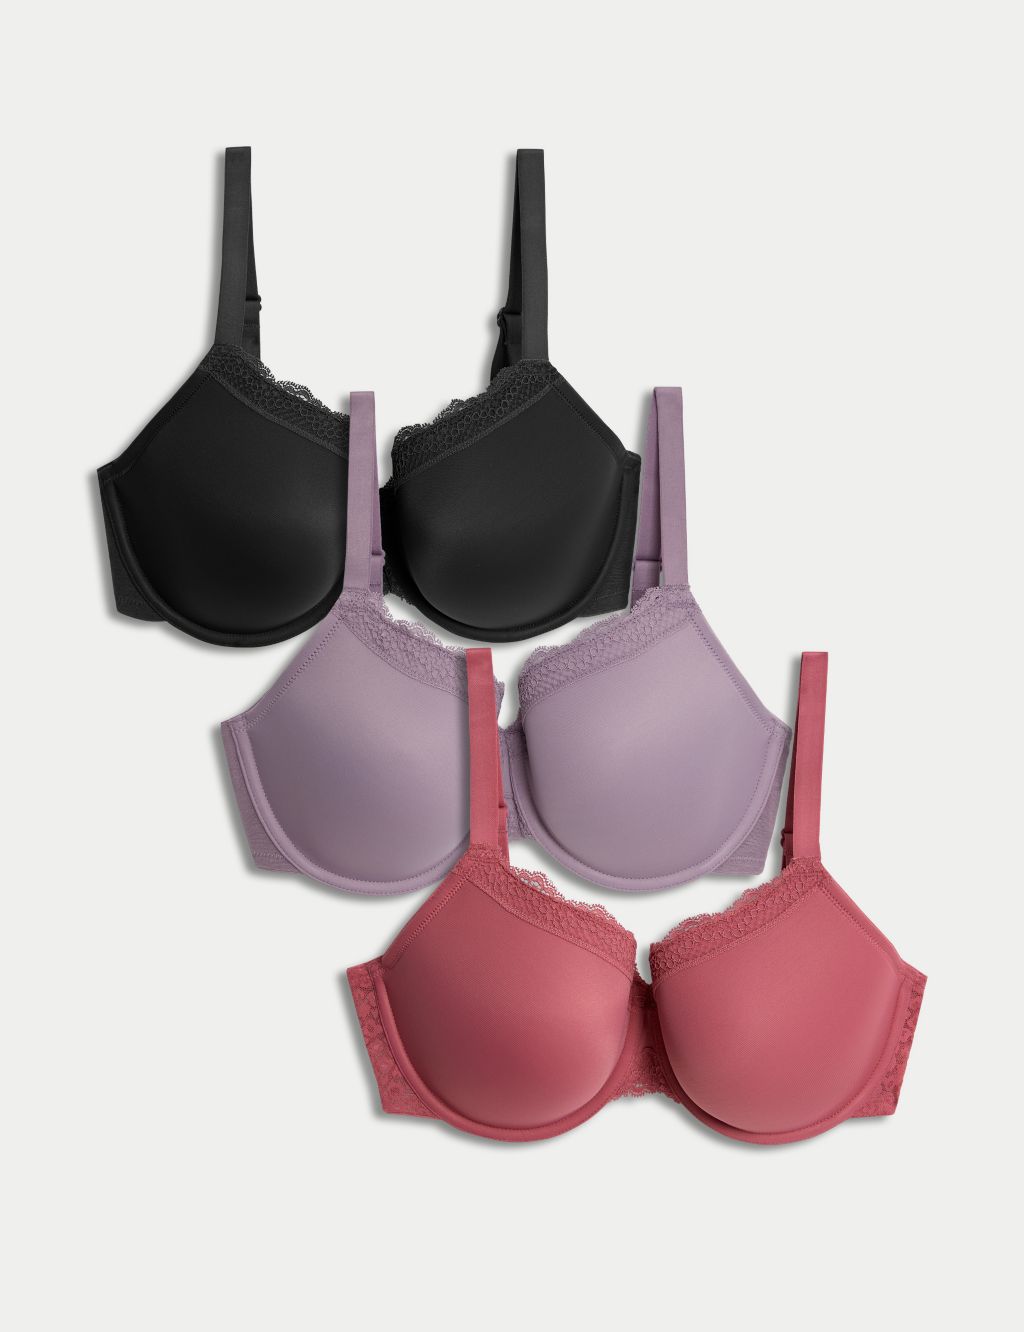 M&S - Neath - BRA FIT IS BACK 👙 Our bra fitting service is available to  you at Neath M&S on Saturdays 9am - 4:30pm and Sundays 11am - 2:30pm. Find  the